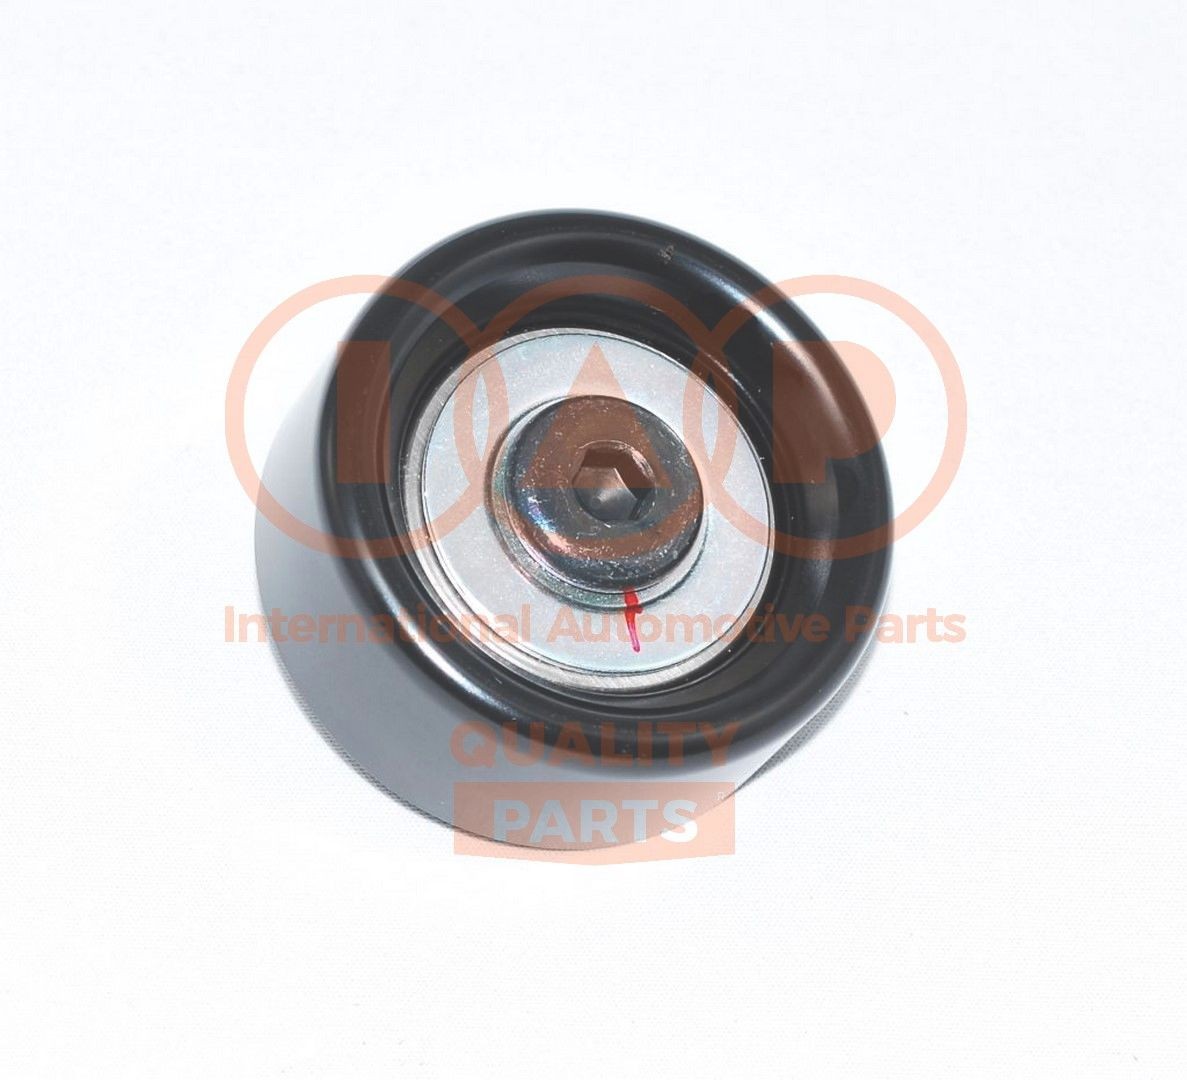 IAP QUALITY PARTS 127-07176G Tensioner pulley 25287-27000